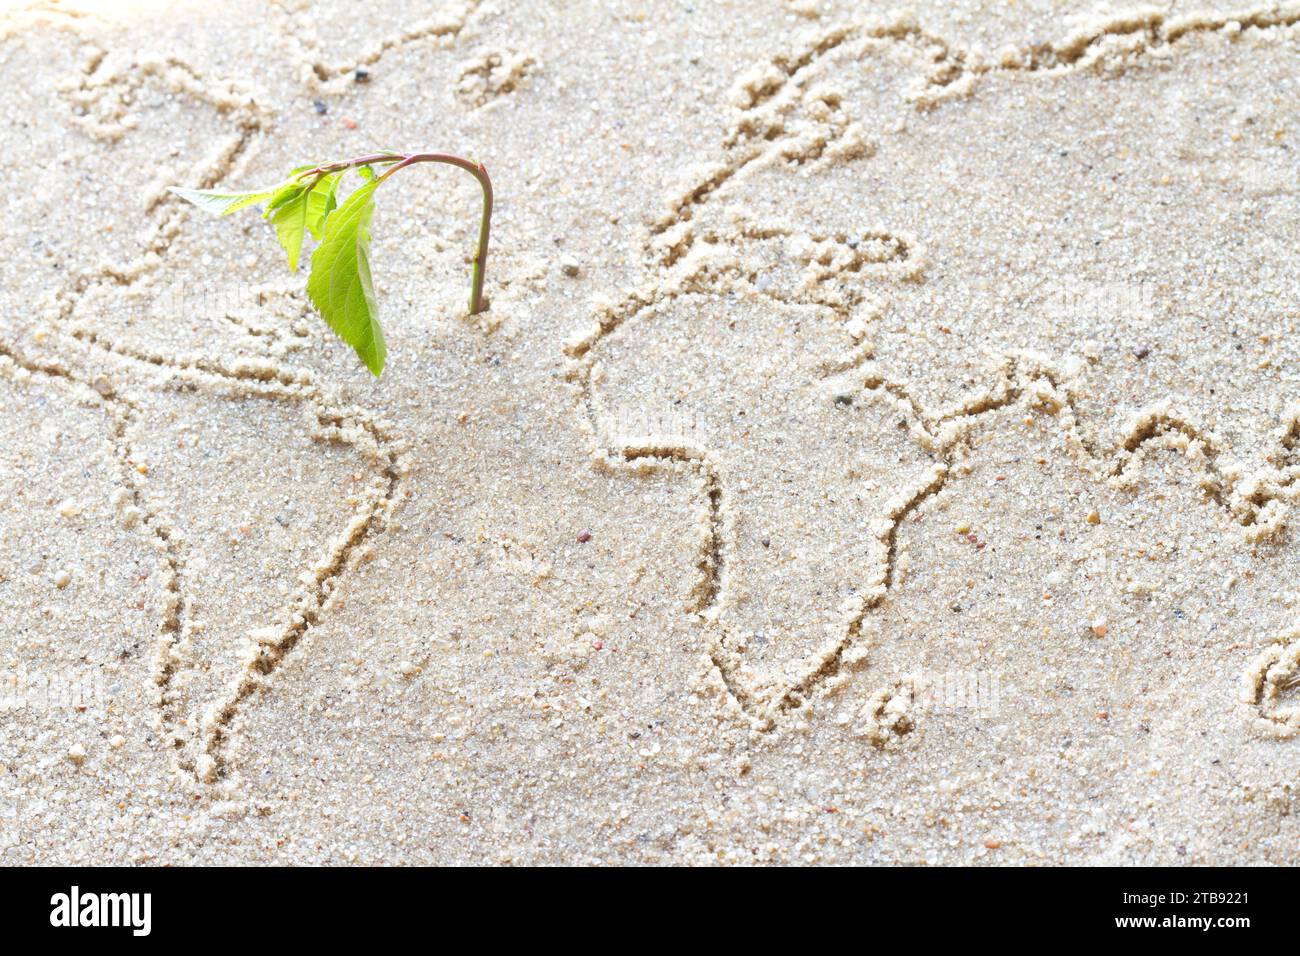 World map on sand, wilting plant, climate change, environment crisis global warming concept Stock Photo